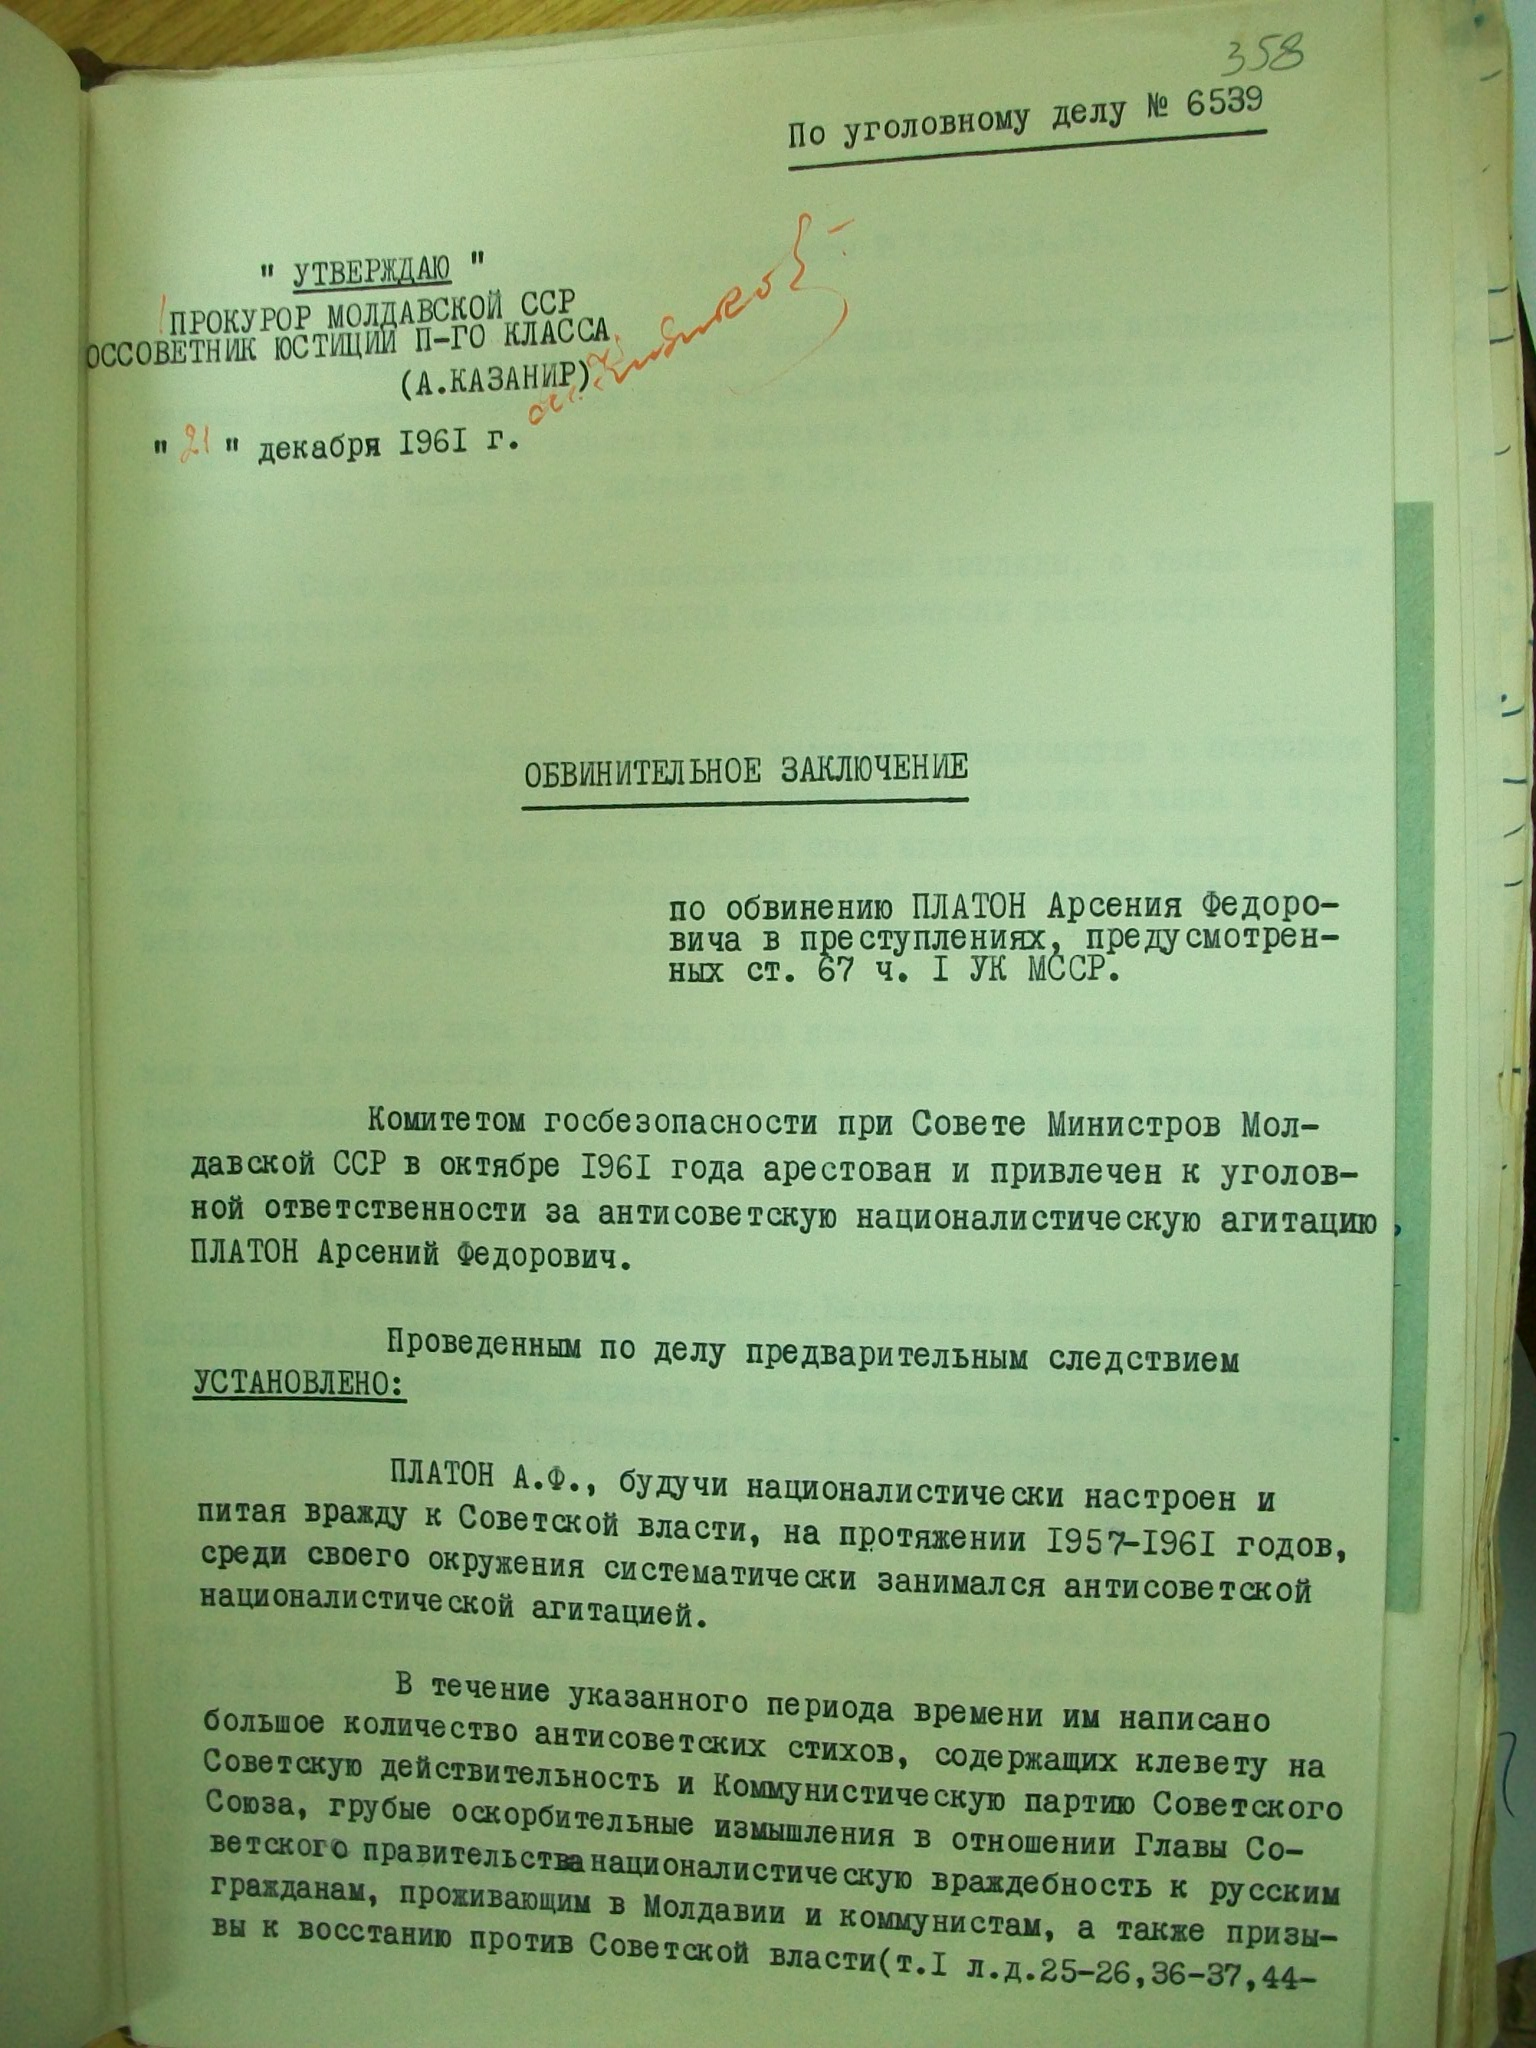 First page of the official accusatory act concerning the case of Arsenie Platon